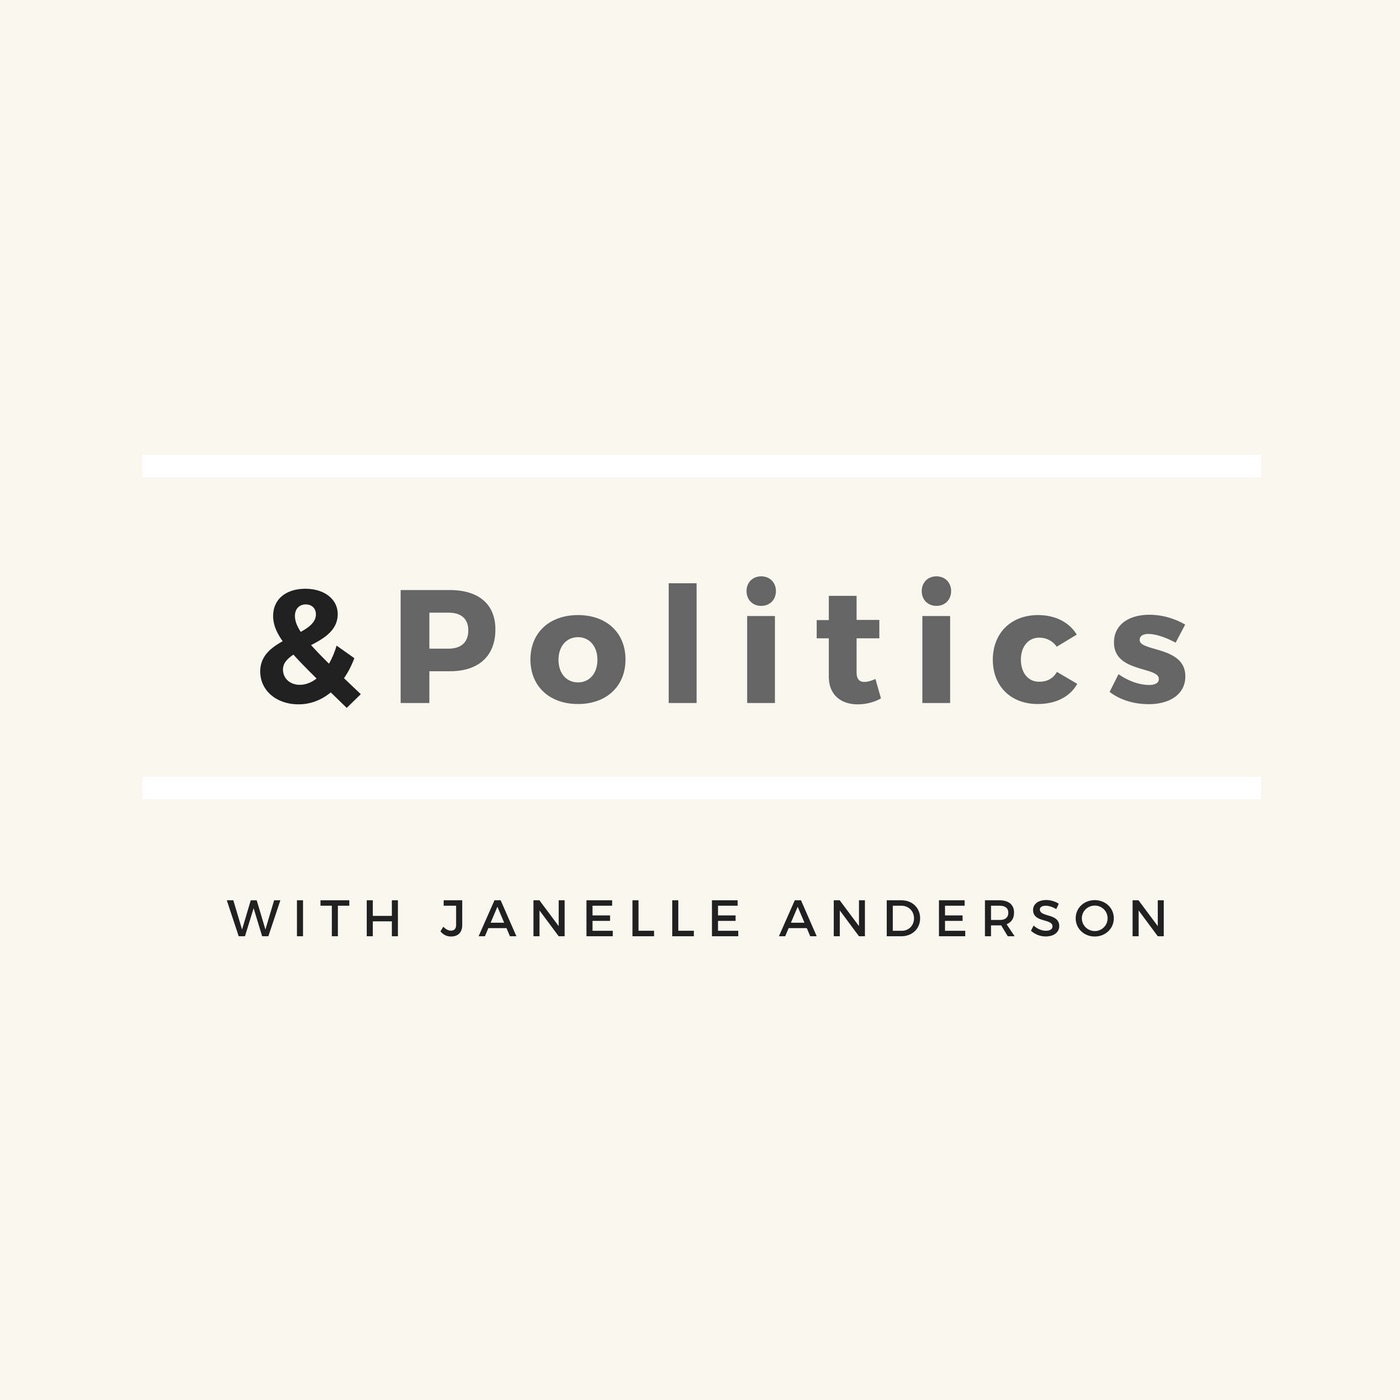 &Politics with Janelle Anderson